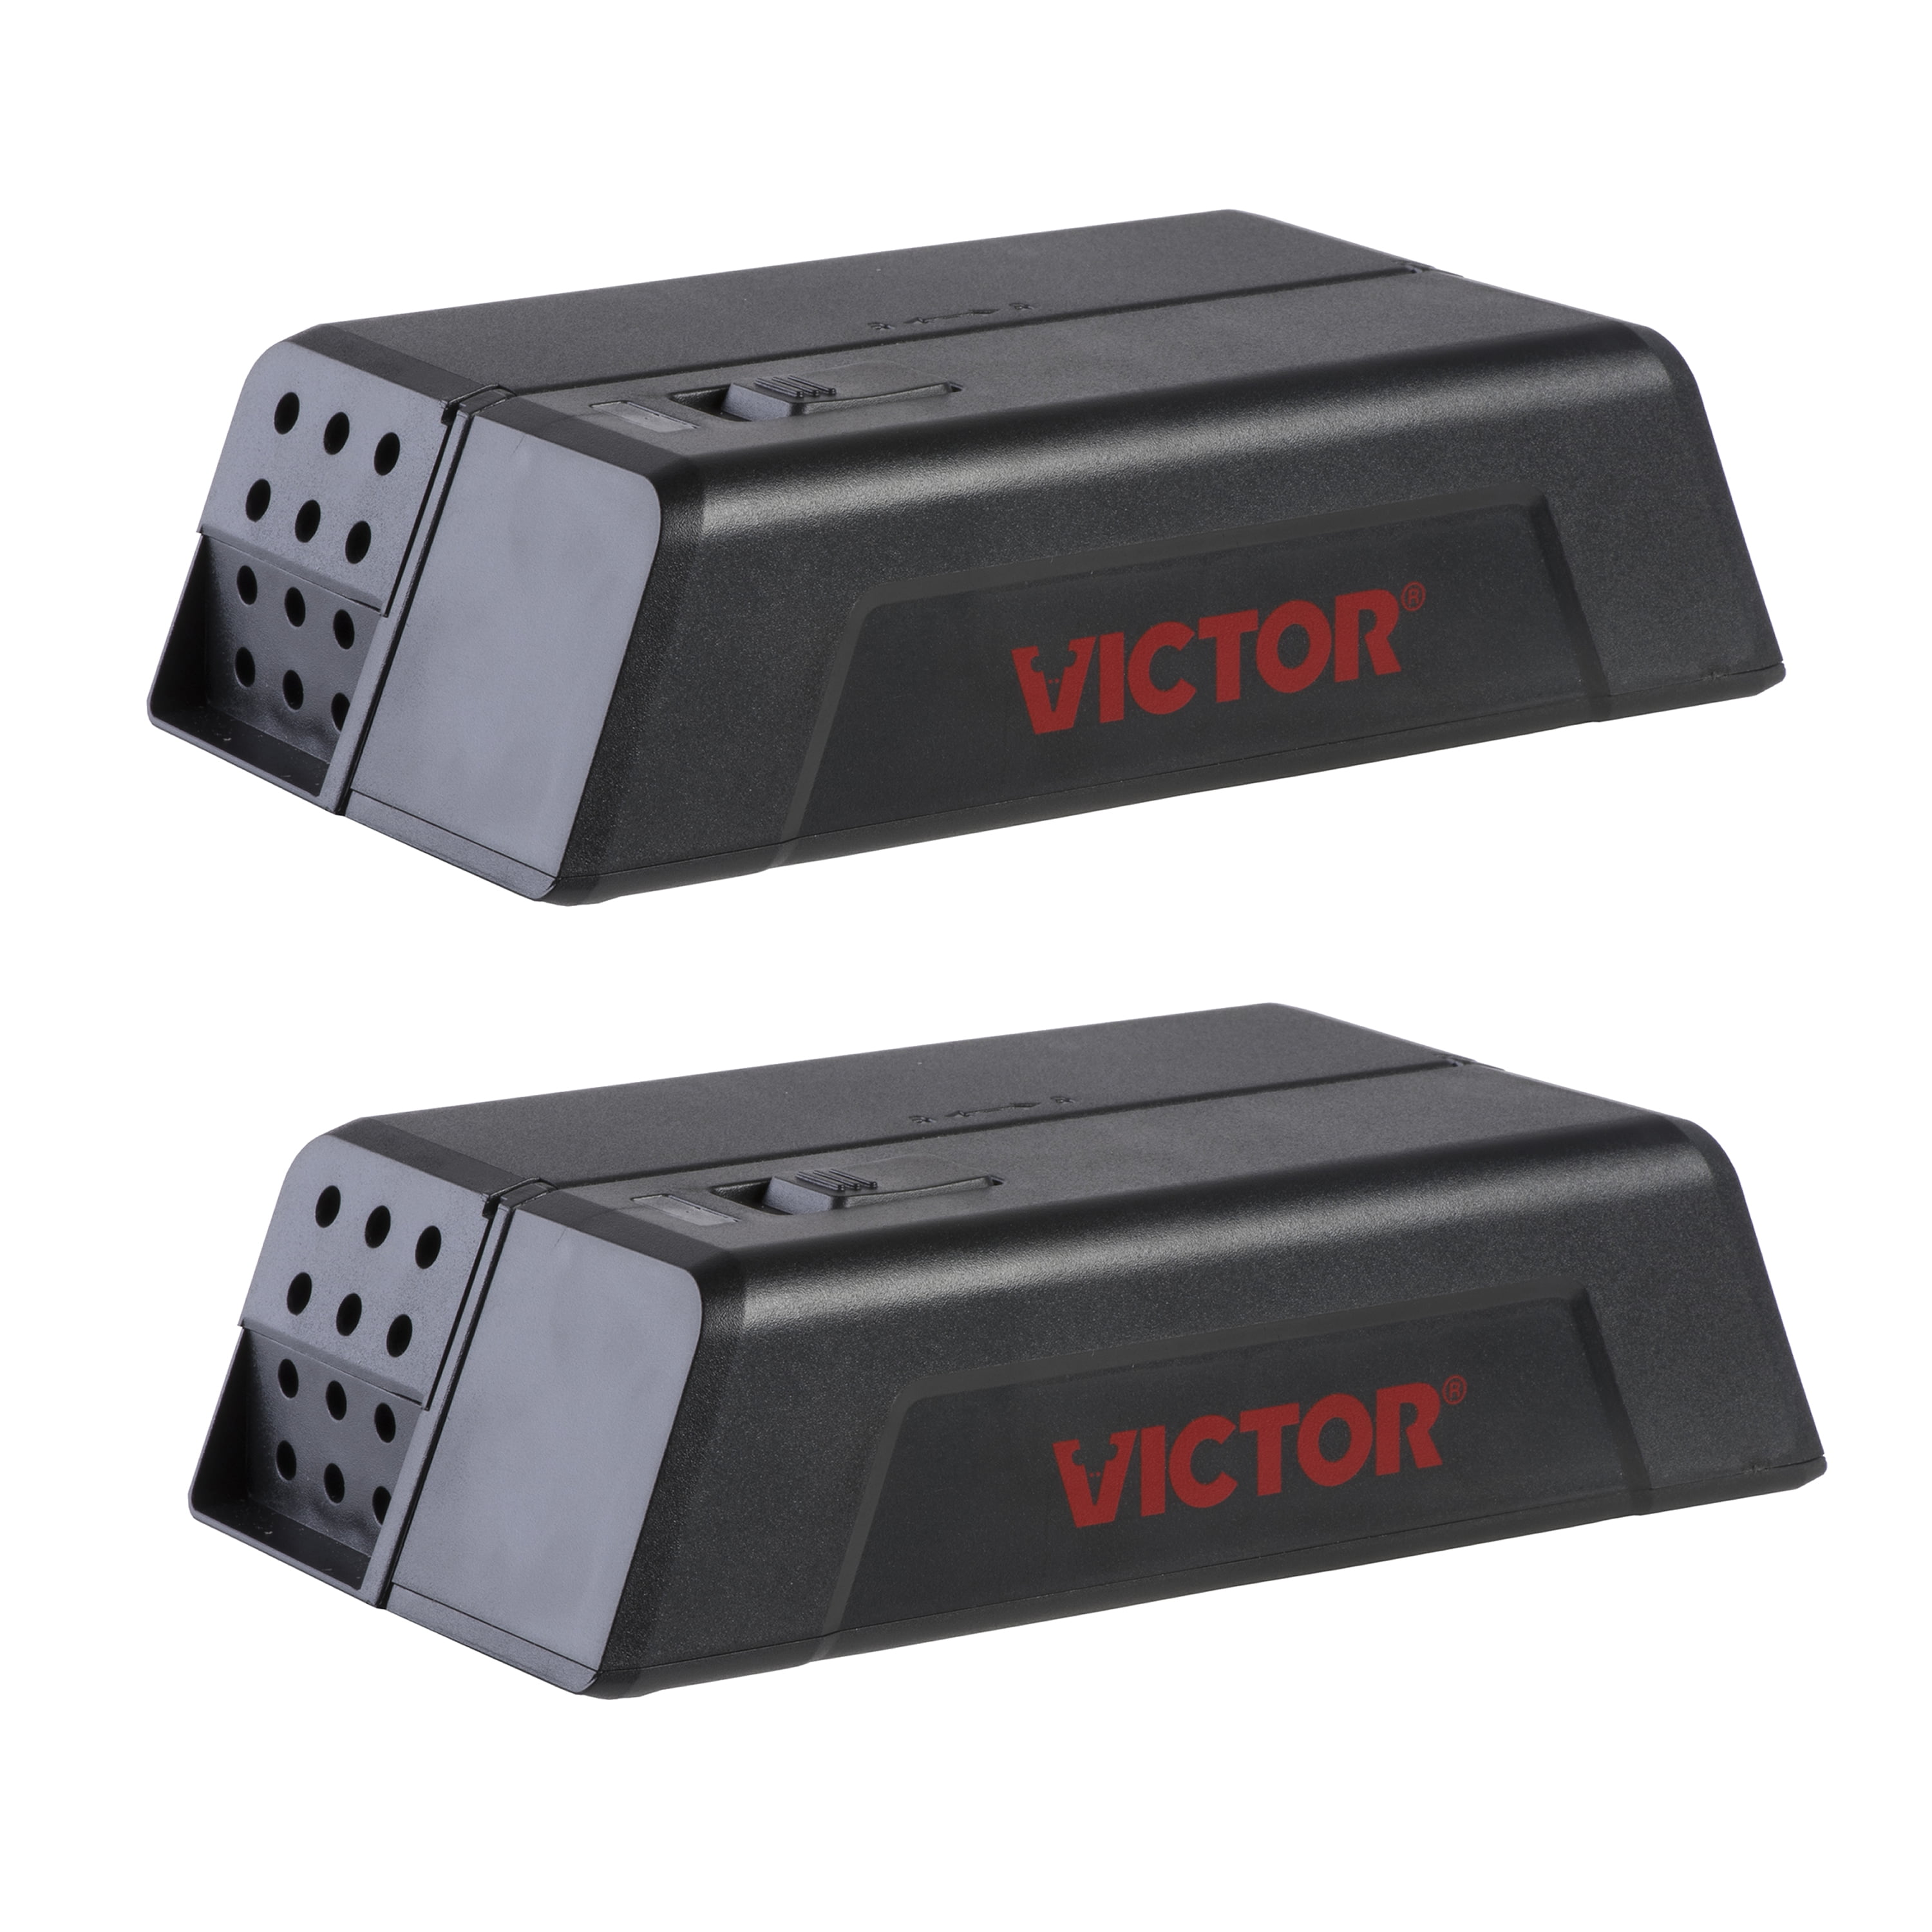 Victor Mechanical Metal Pedal Mouse Trap (2-Pack) - Baller Hardware